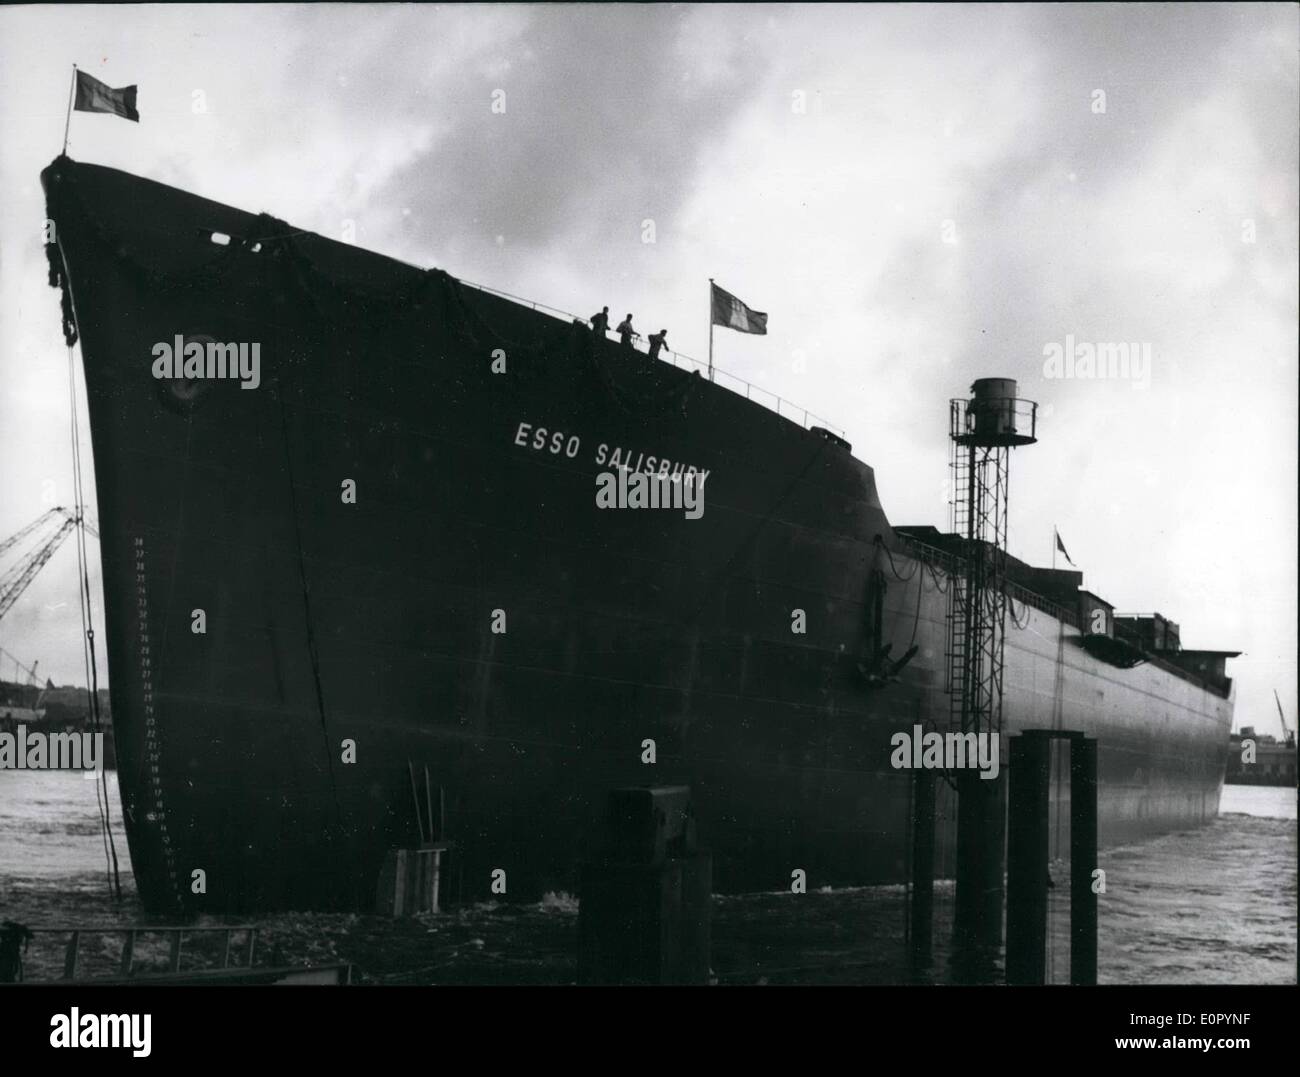 Jul. 07, 1957 - The tanker - third - largest in world.....which has been built at the Howladts-Works in Hamburg, the 36000 ton - turbine-tanker ''Esso Salisbury'' was launched on Saturday (July 24, 1957). Only the two predecessors, the Onassis-ships ''Al Malik Saud Al Awal'' and ''Tina Onassis'' (with 45000 ton) are larger., The ''Esso Salisbury'' has sea length of altogether 691 feet;l machine-capacity is 17600 max, the speed 17 knots. Stock Photo